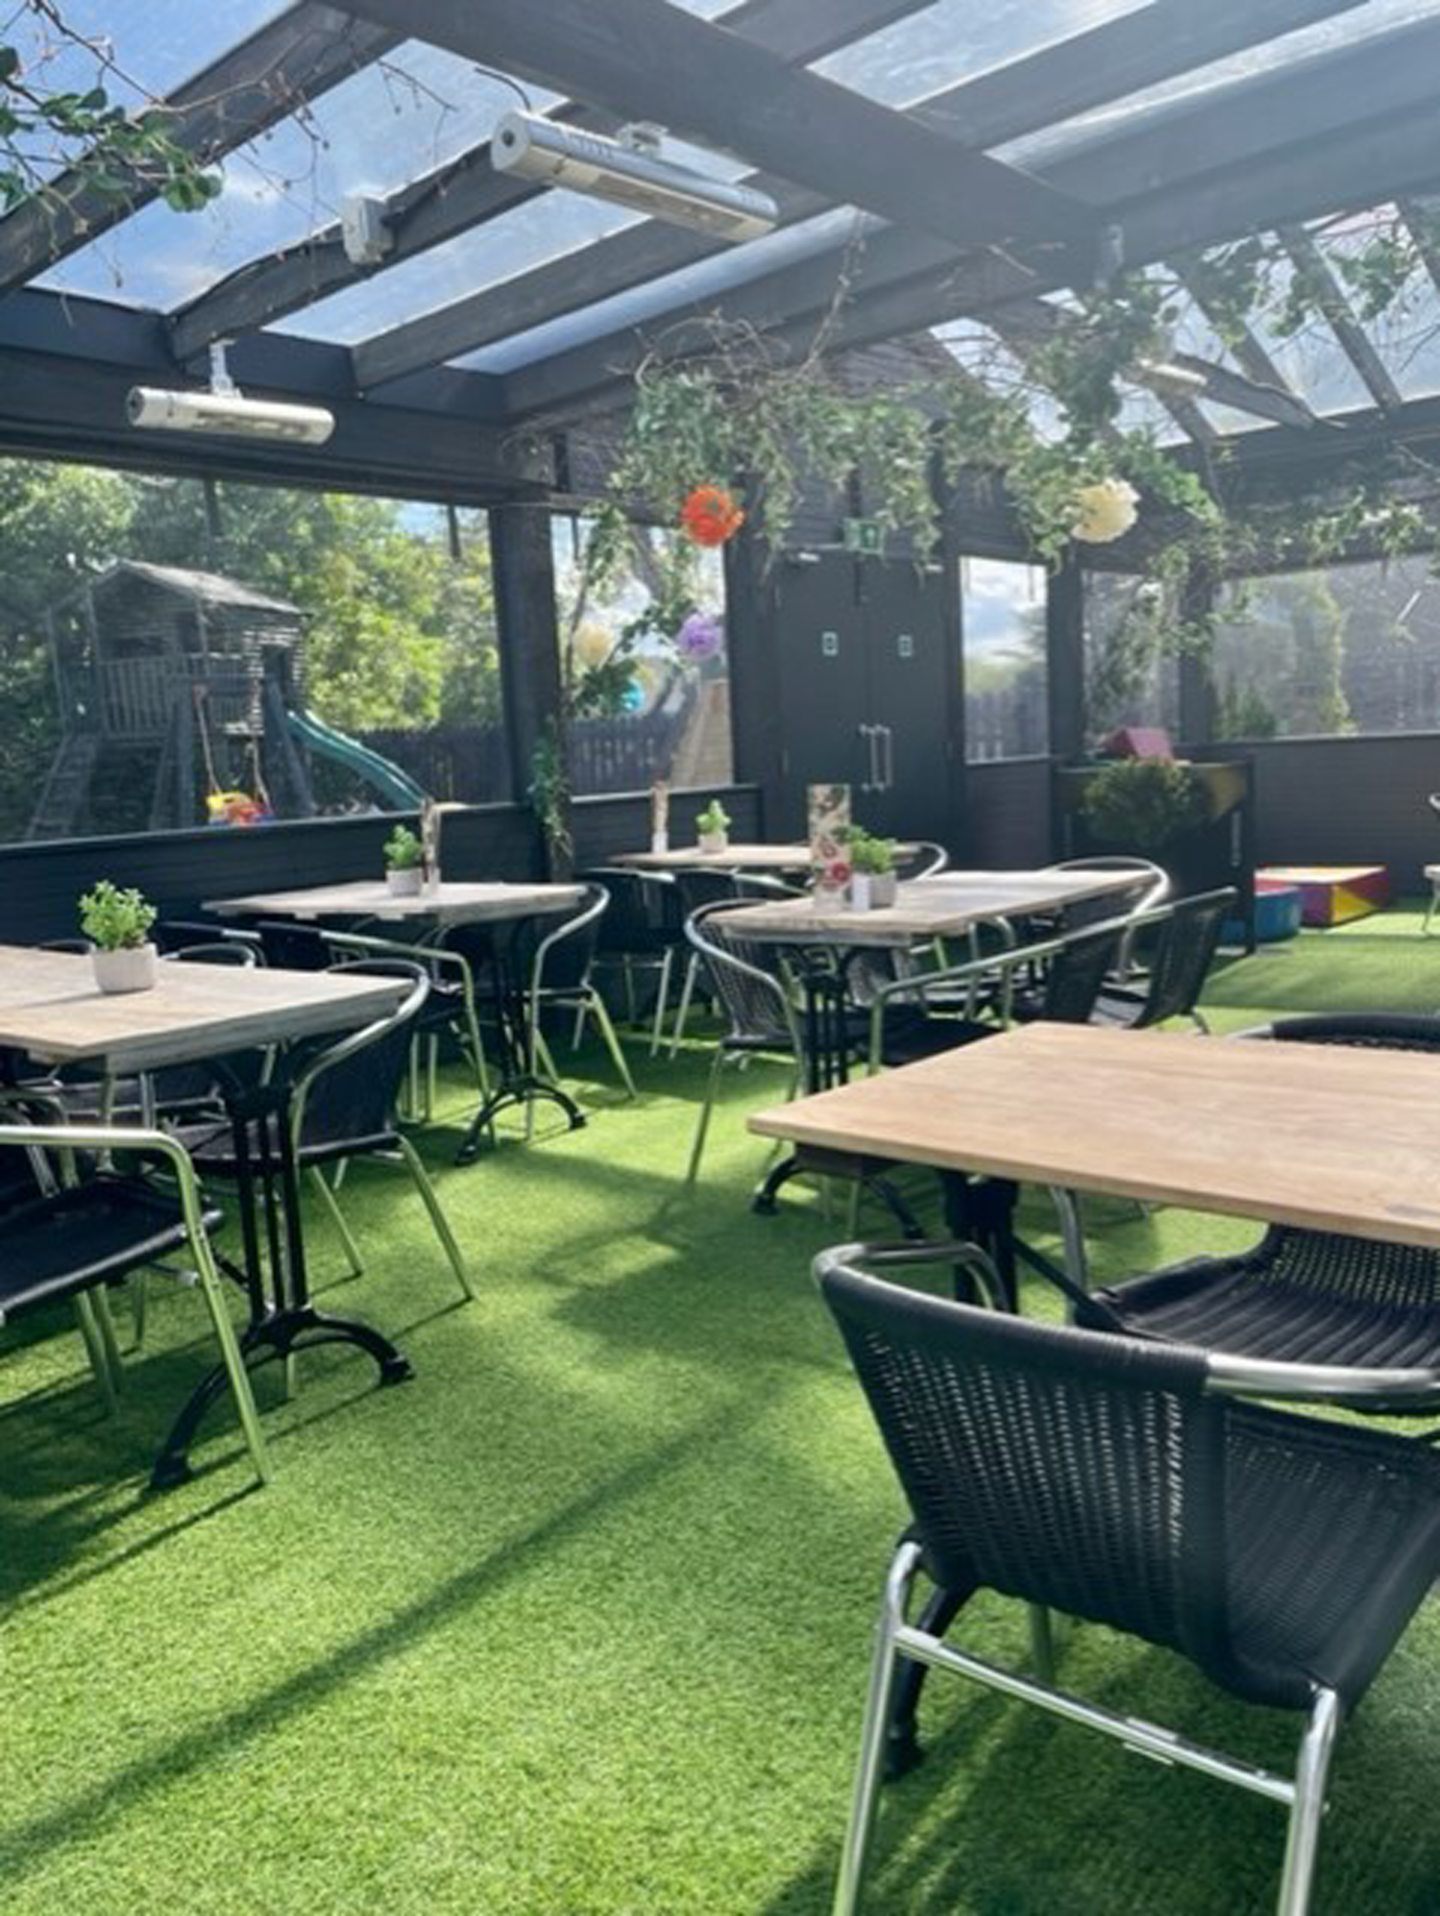 The Newmacher Hotel's outdoor dining terrace.